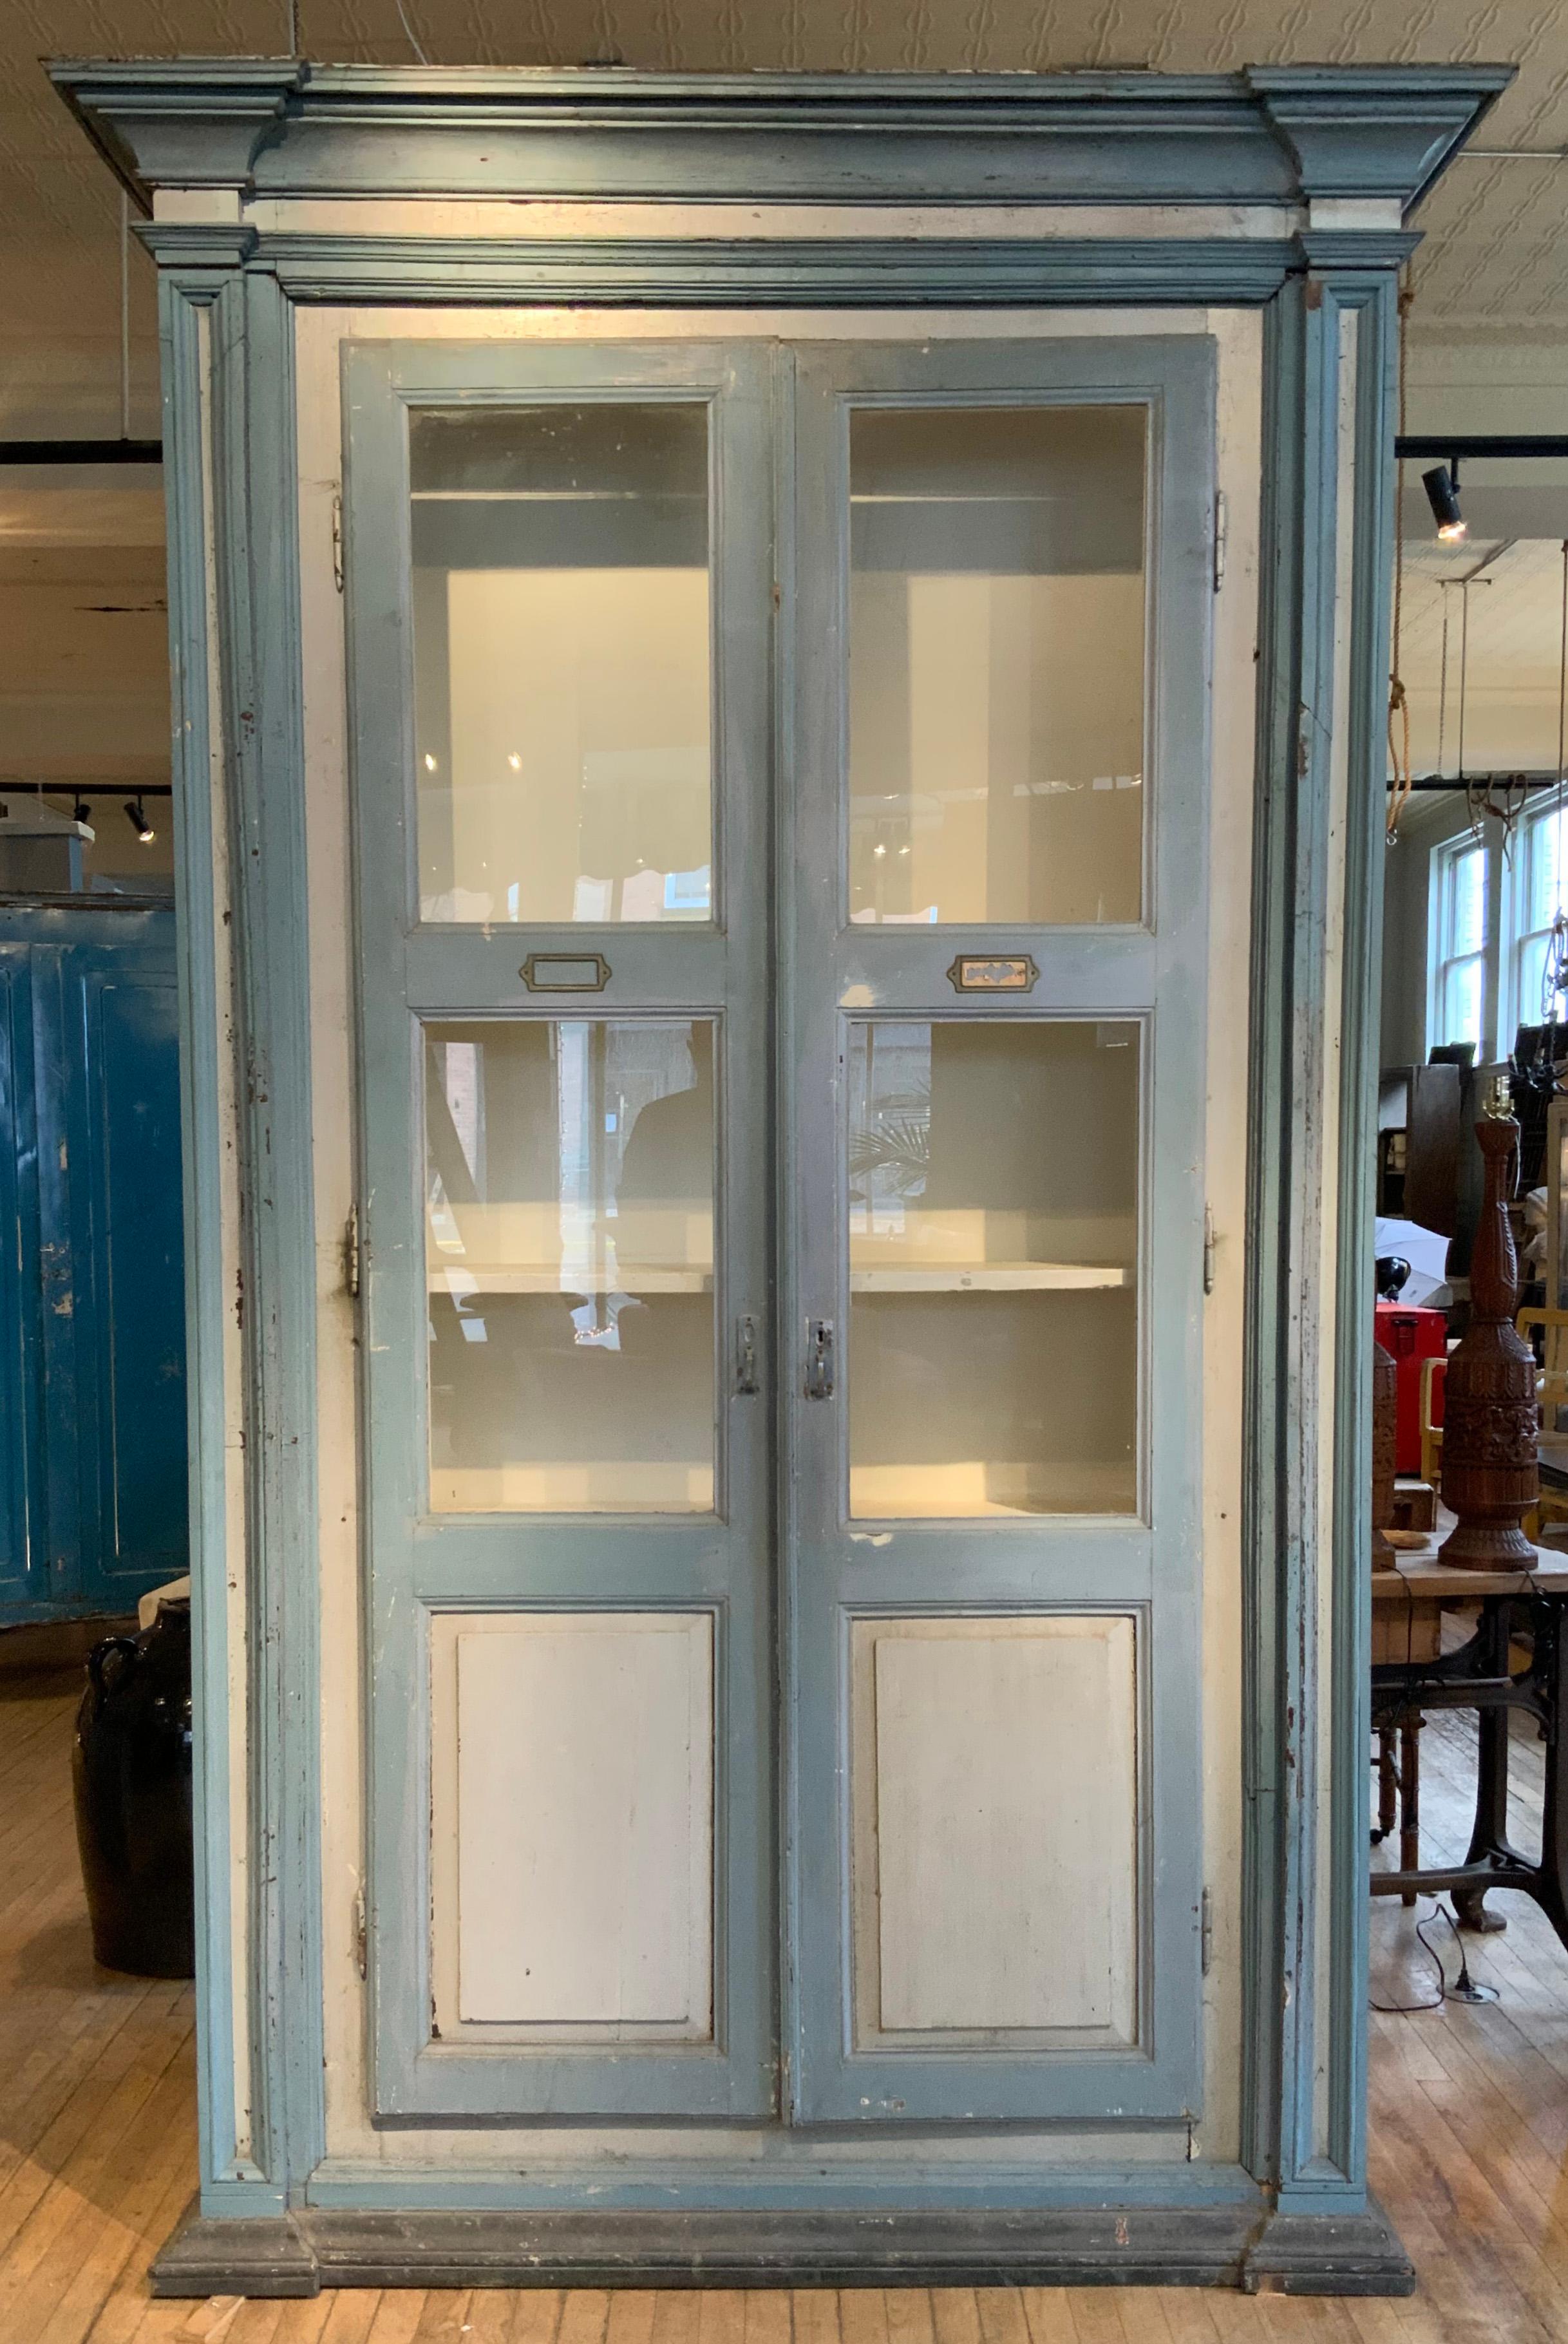 a beautiful antique 19th century Italian tall painted cabinet, with exaggerated stepped molding capital, and a pair of antique glass doors. lovely painted finish in cream and powder blue, with panelled details on the sides and front of the cabinet.